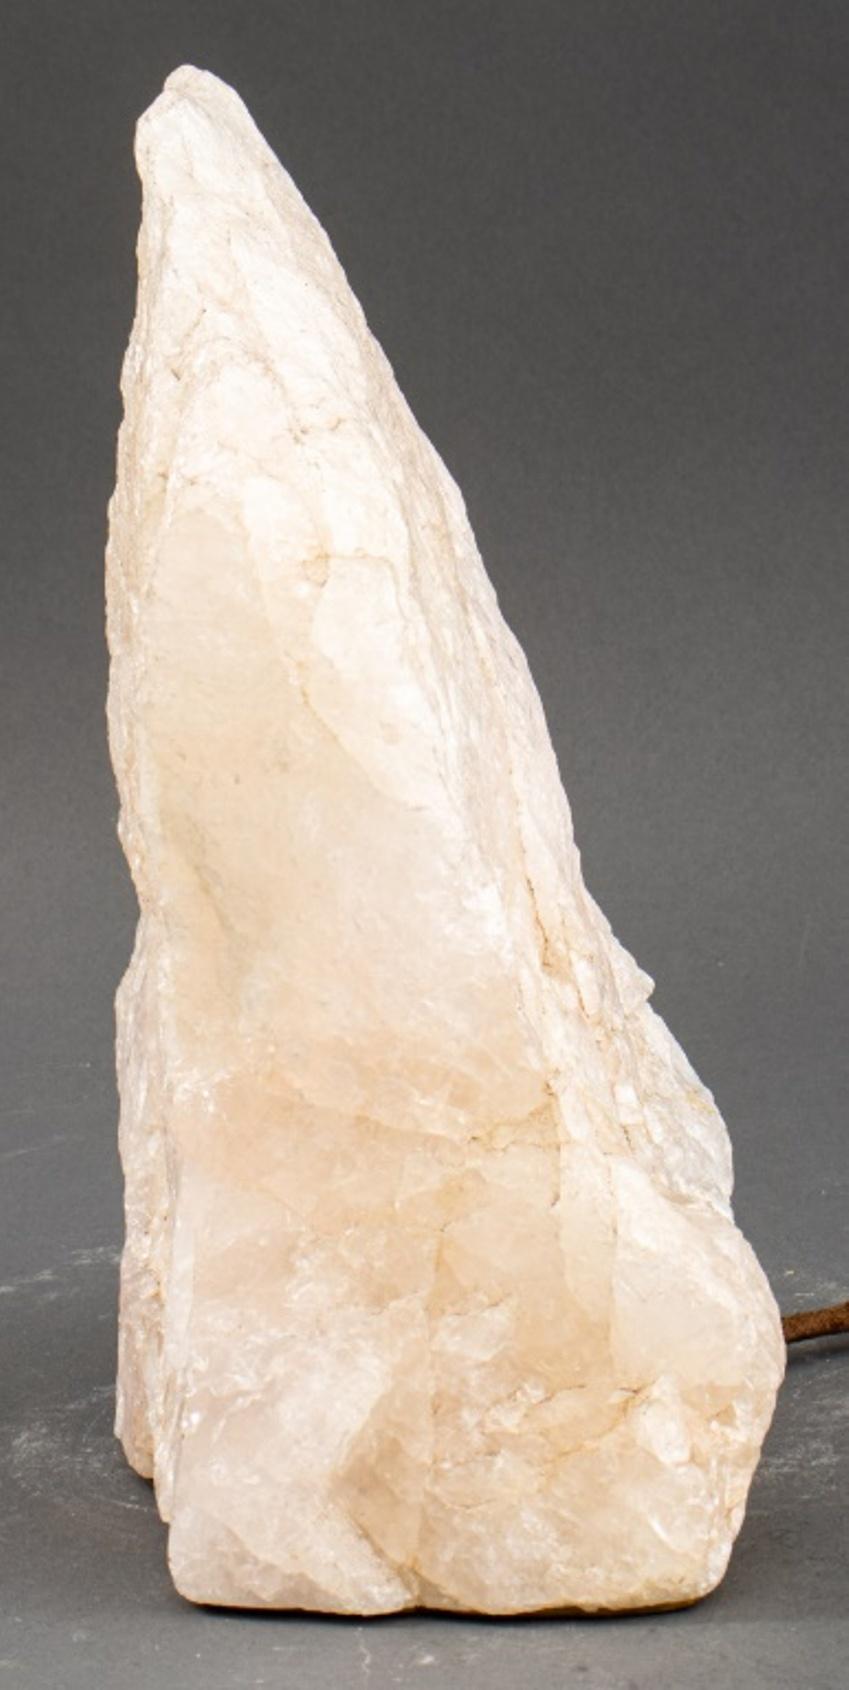 White quartzite mineral specimen of standing form, mounted as a lamp. Measures : 10.5